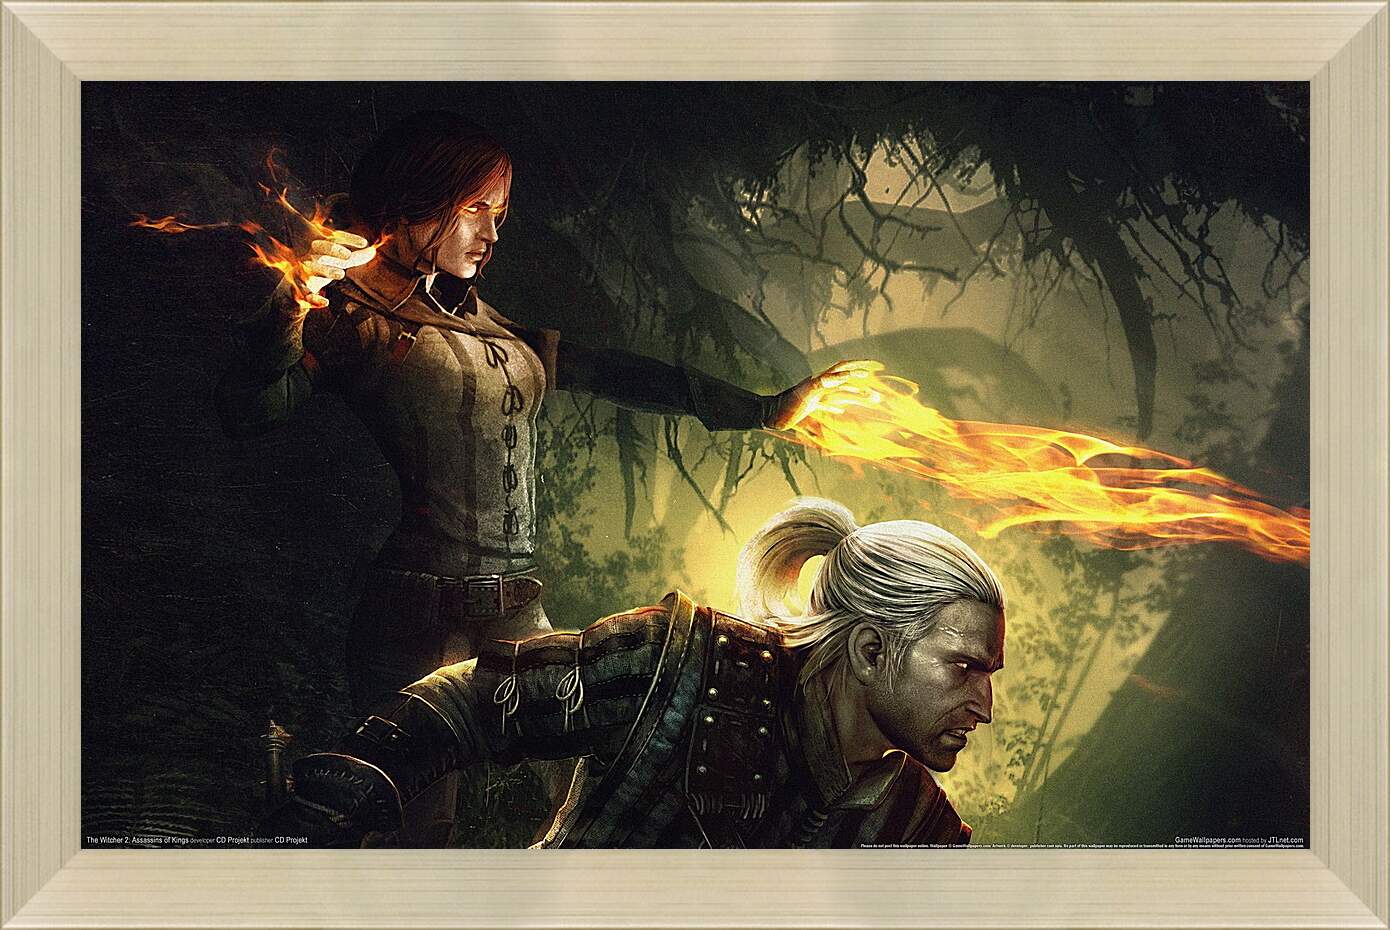 Картина в раме - The Witcher 2: Assassins Of Kings